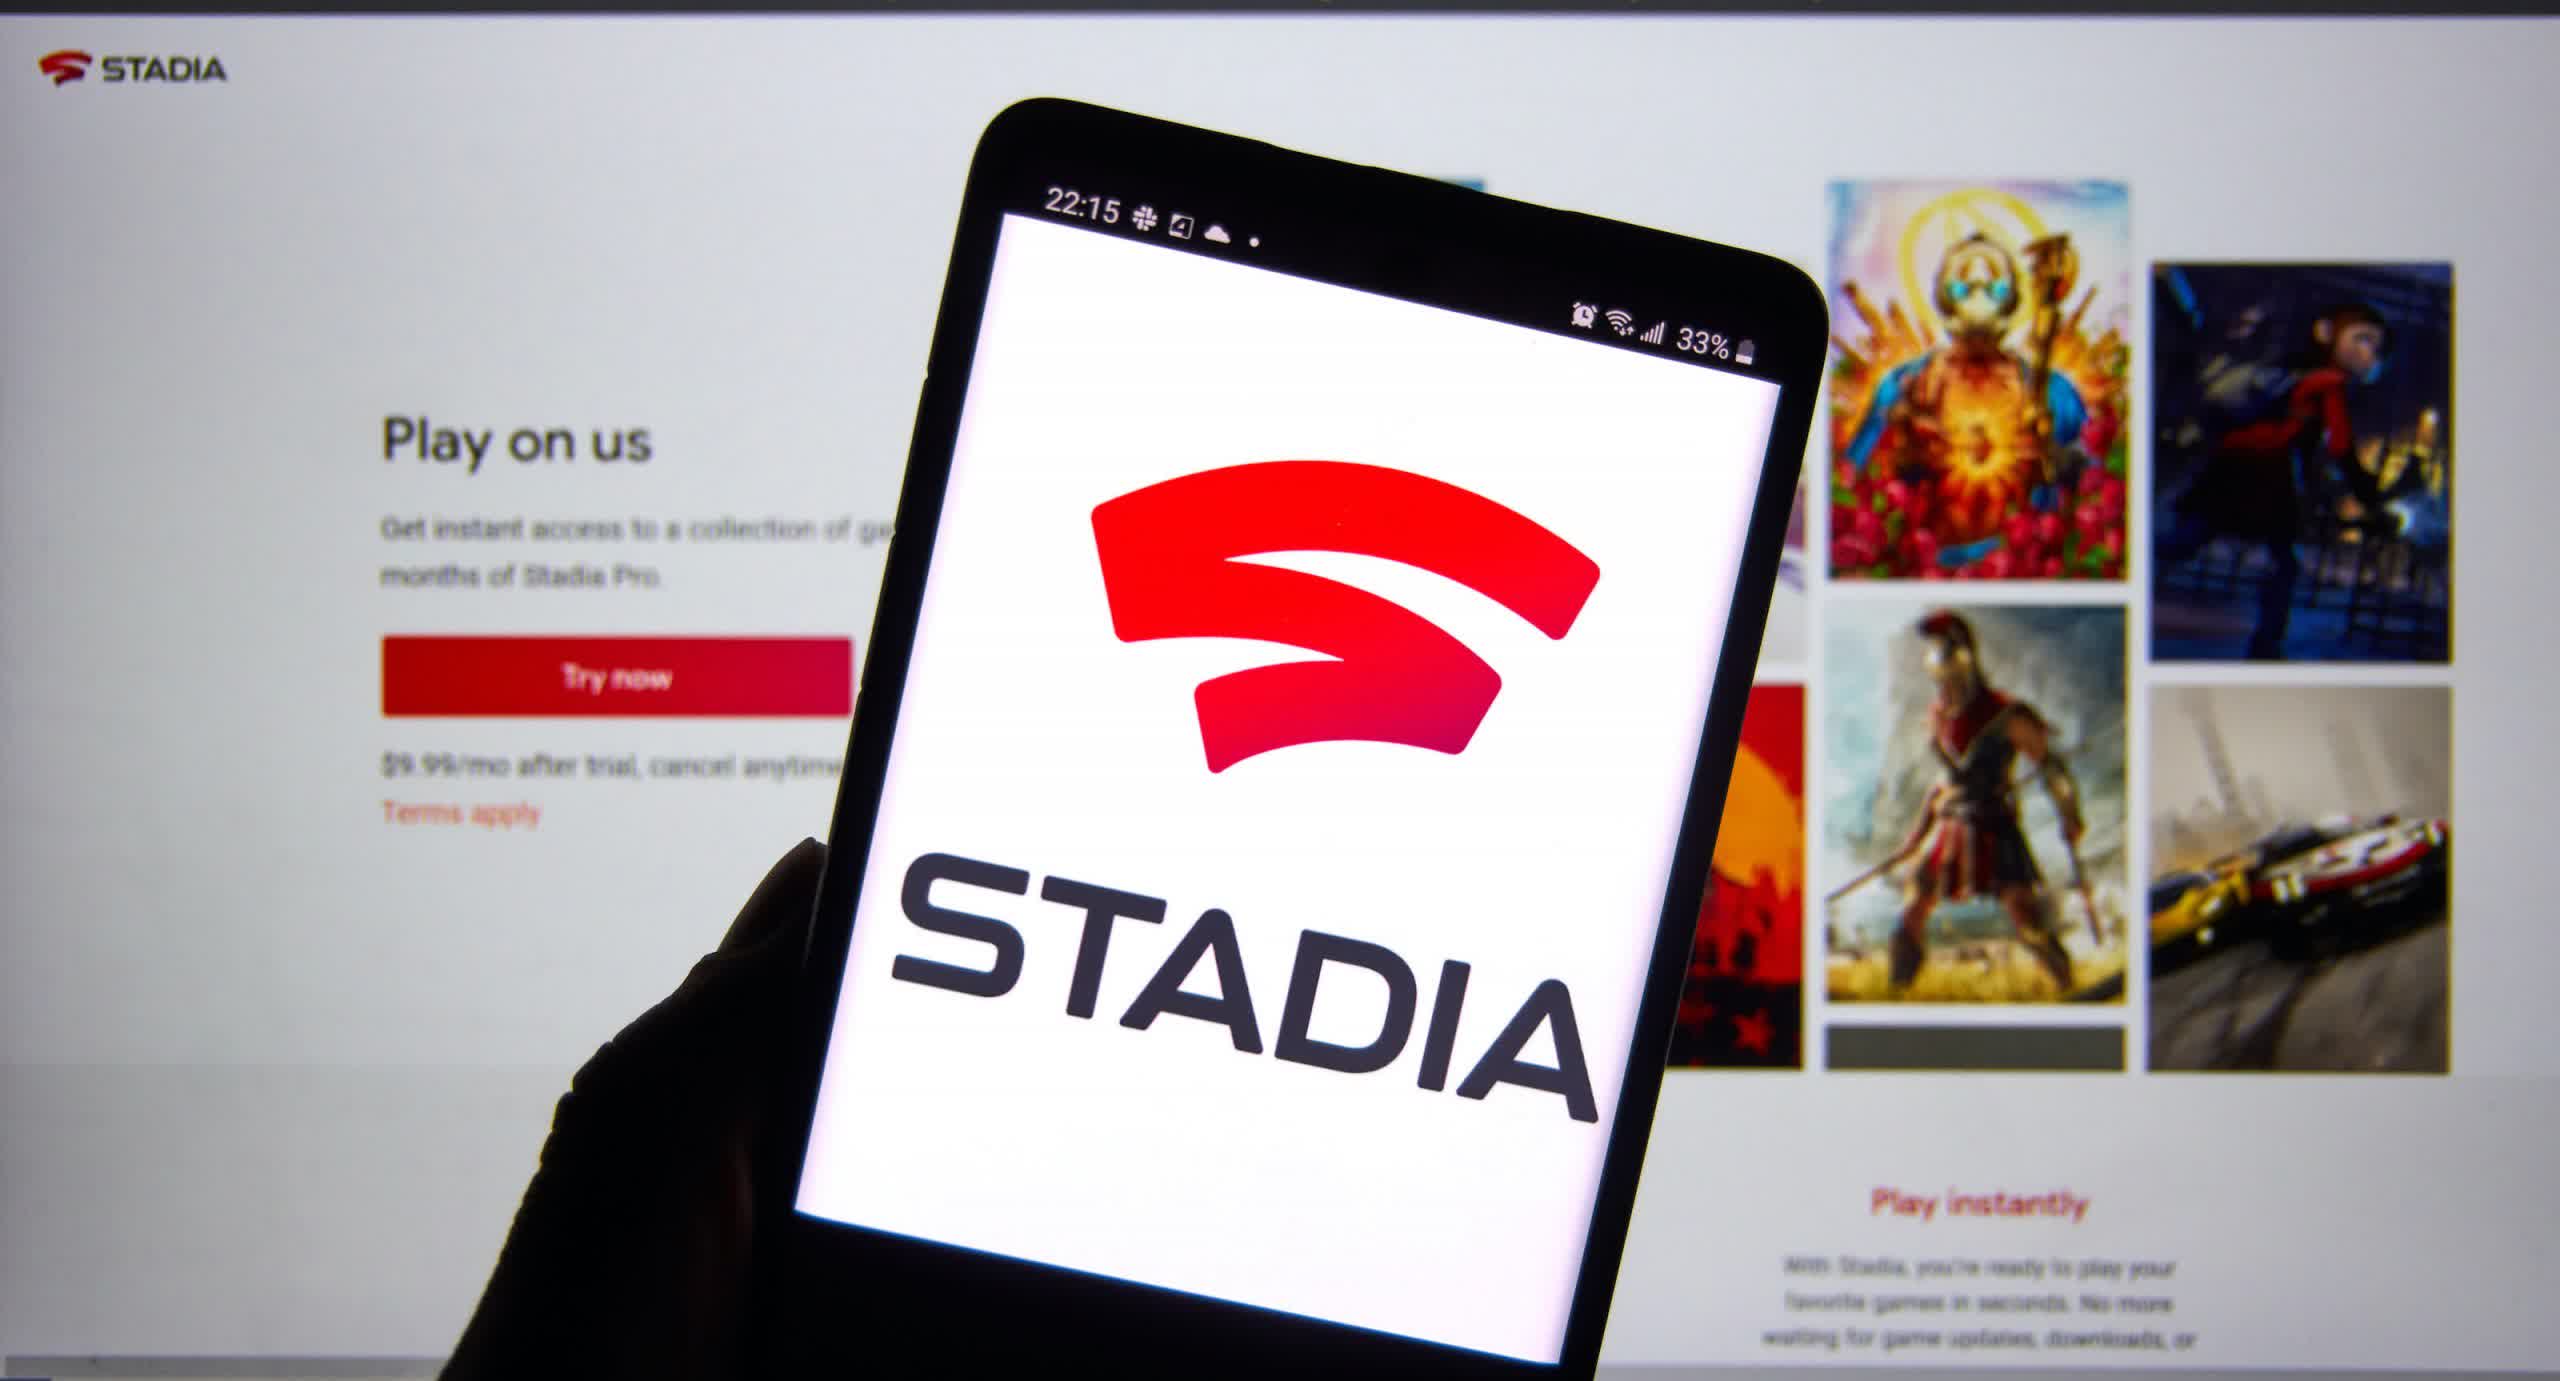 Players can now try Google Stadia commitment-free for 30-minutes